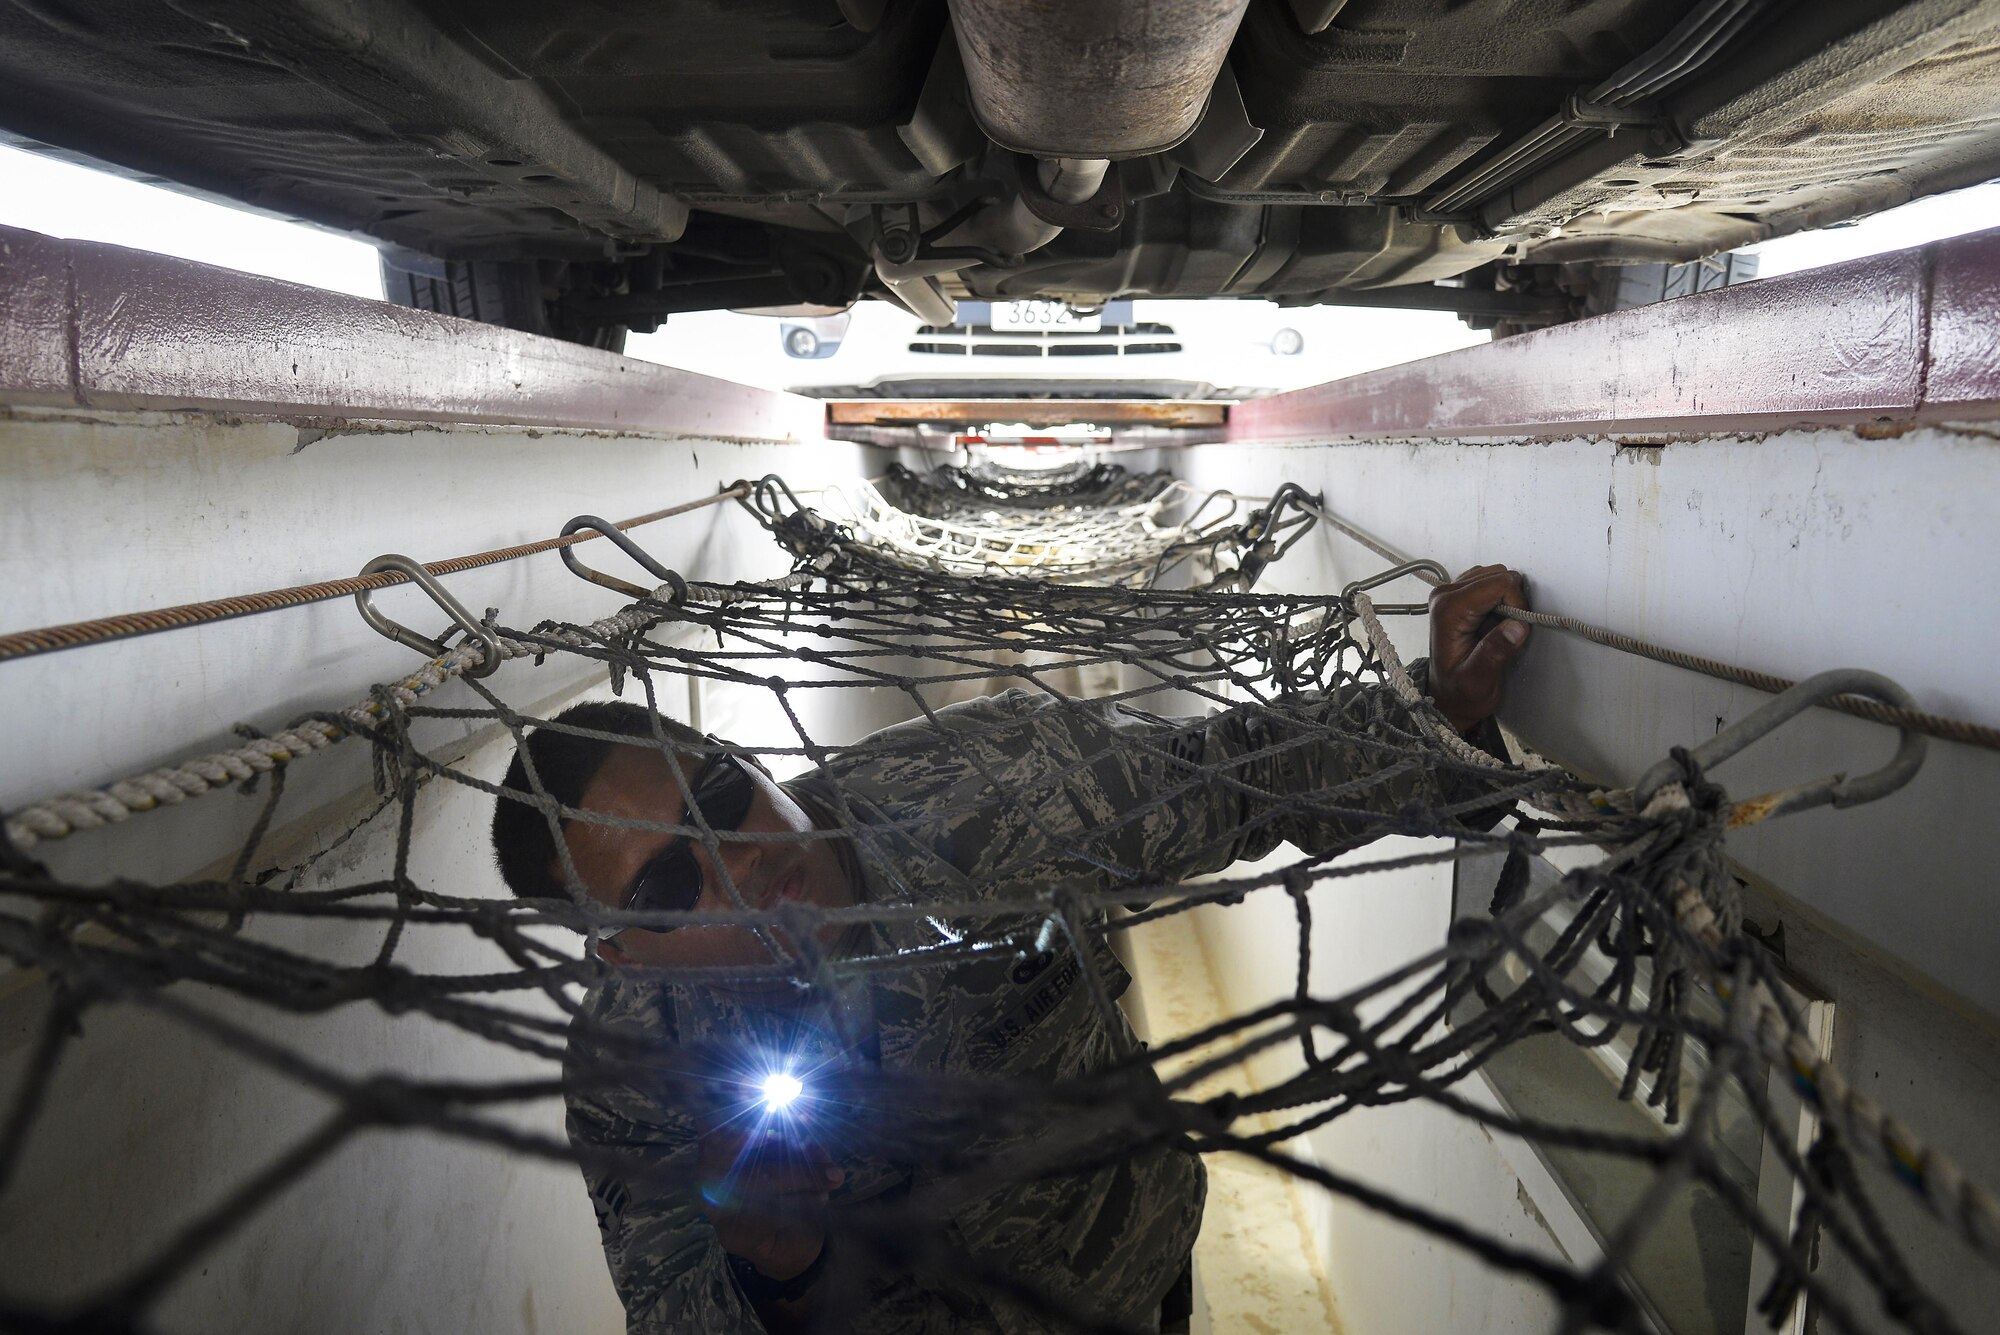 Senior Airman Alema searches the bottom of a vehicle for contraband and explosives at an undisclosed location in Southwest Asia July 13, 2015. Airman Alema is a security forces member assigned to the 380th Expeditionary Security Forces Squadron, vehicle search area. (U.S. Air Force photo/Tech. Sgt. Christopher Boitz)